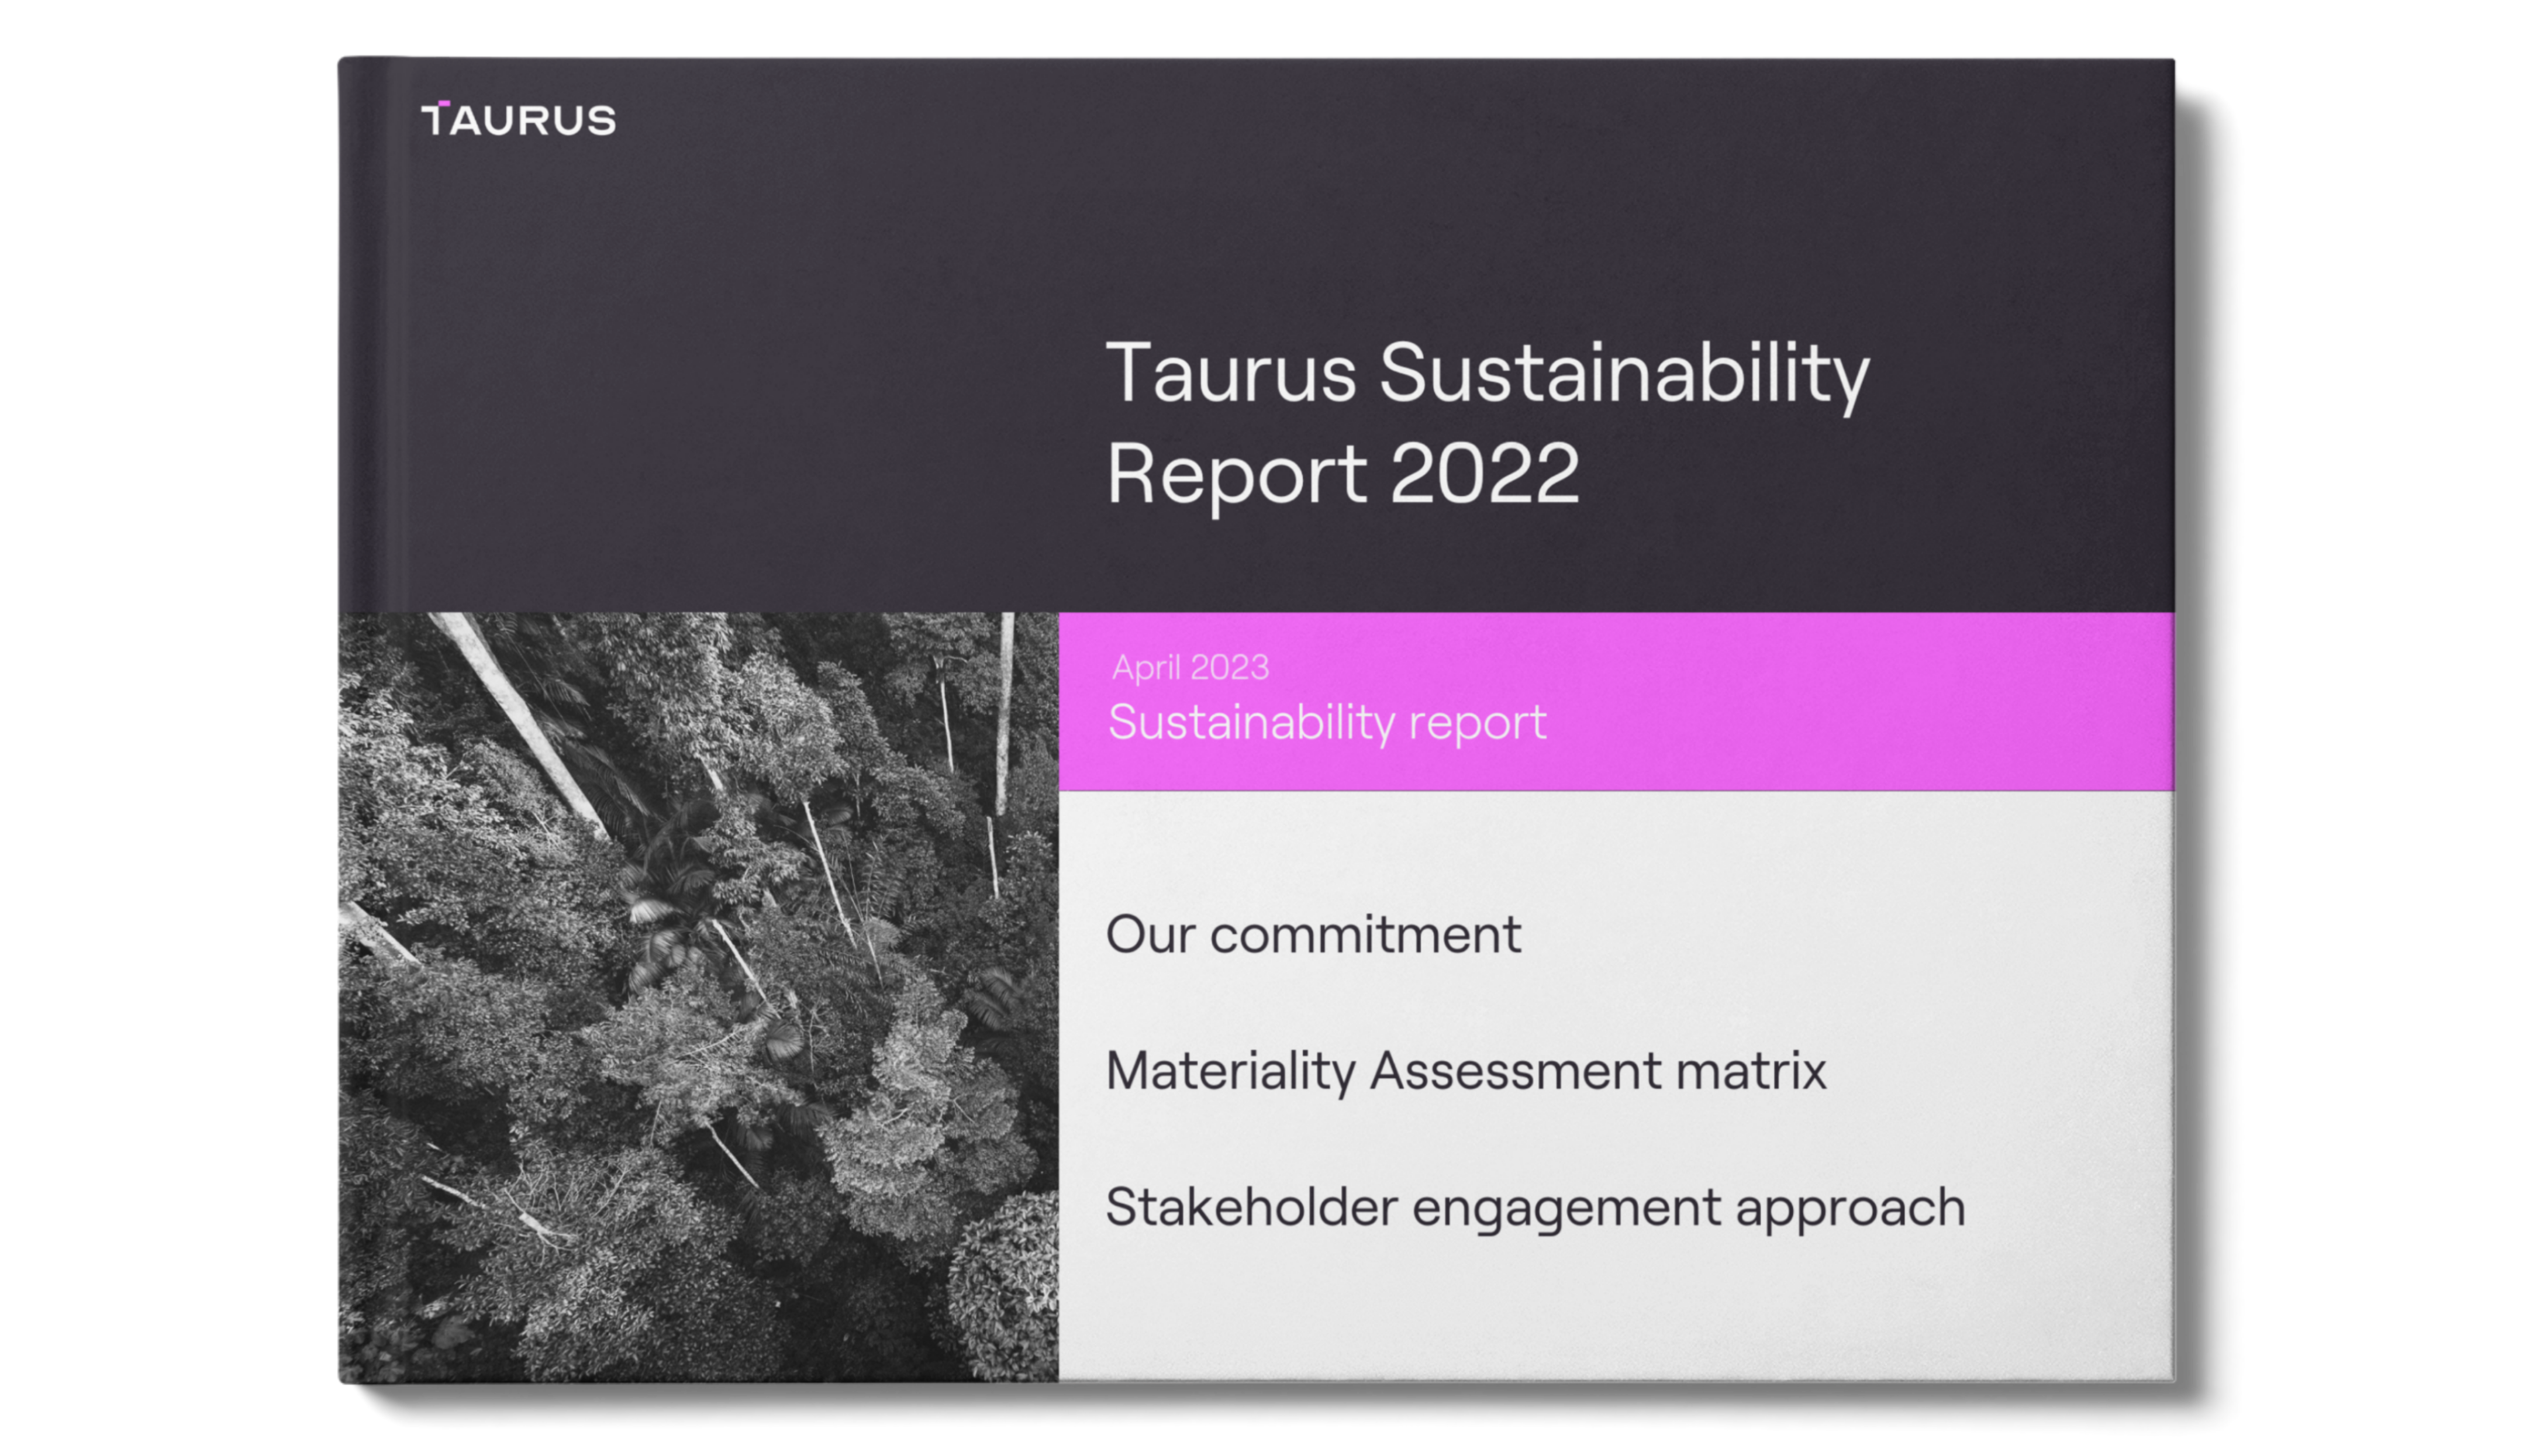 Our commitment to sustainability